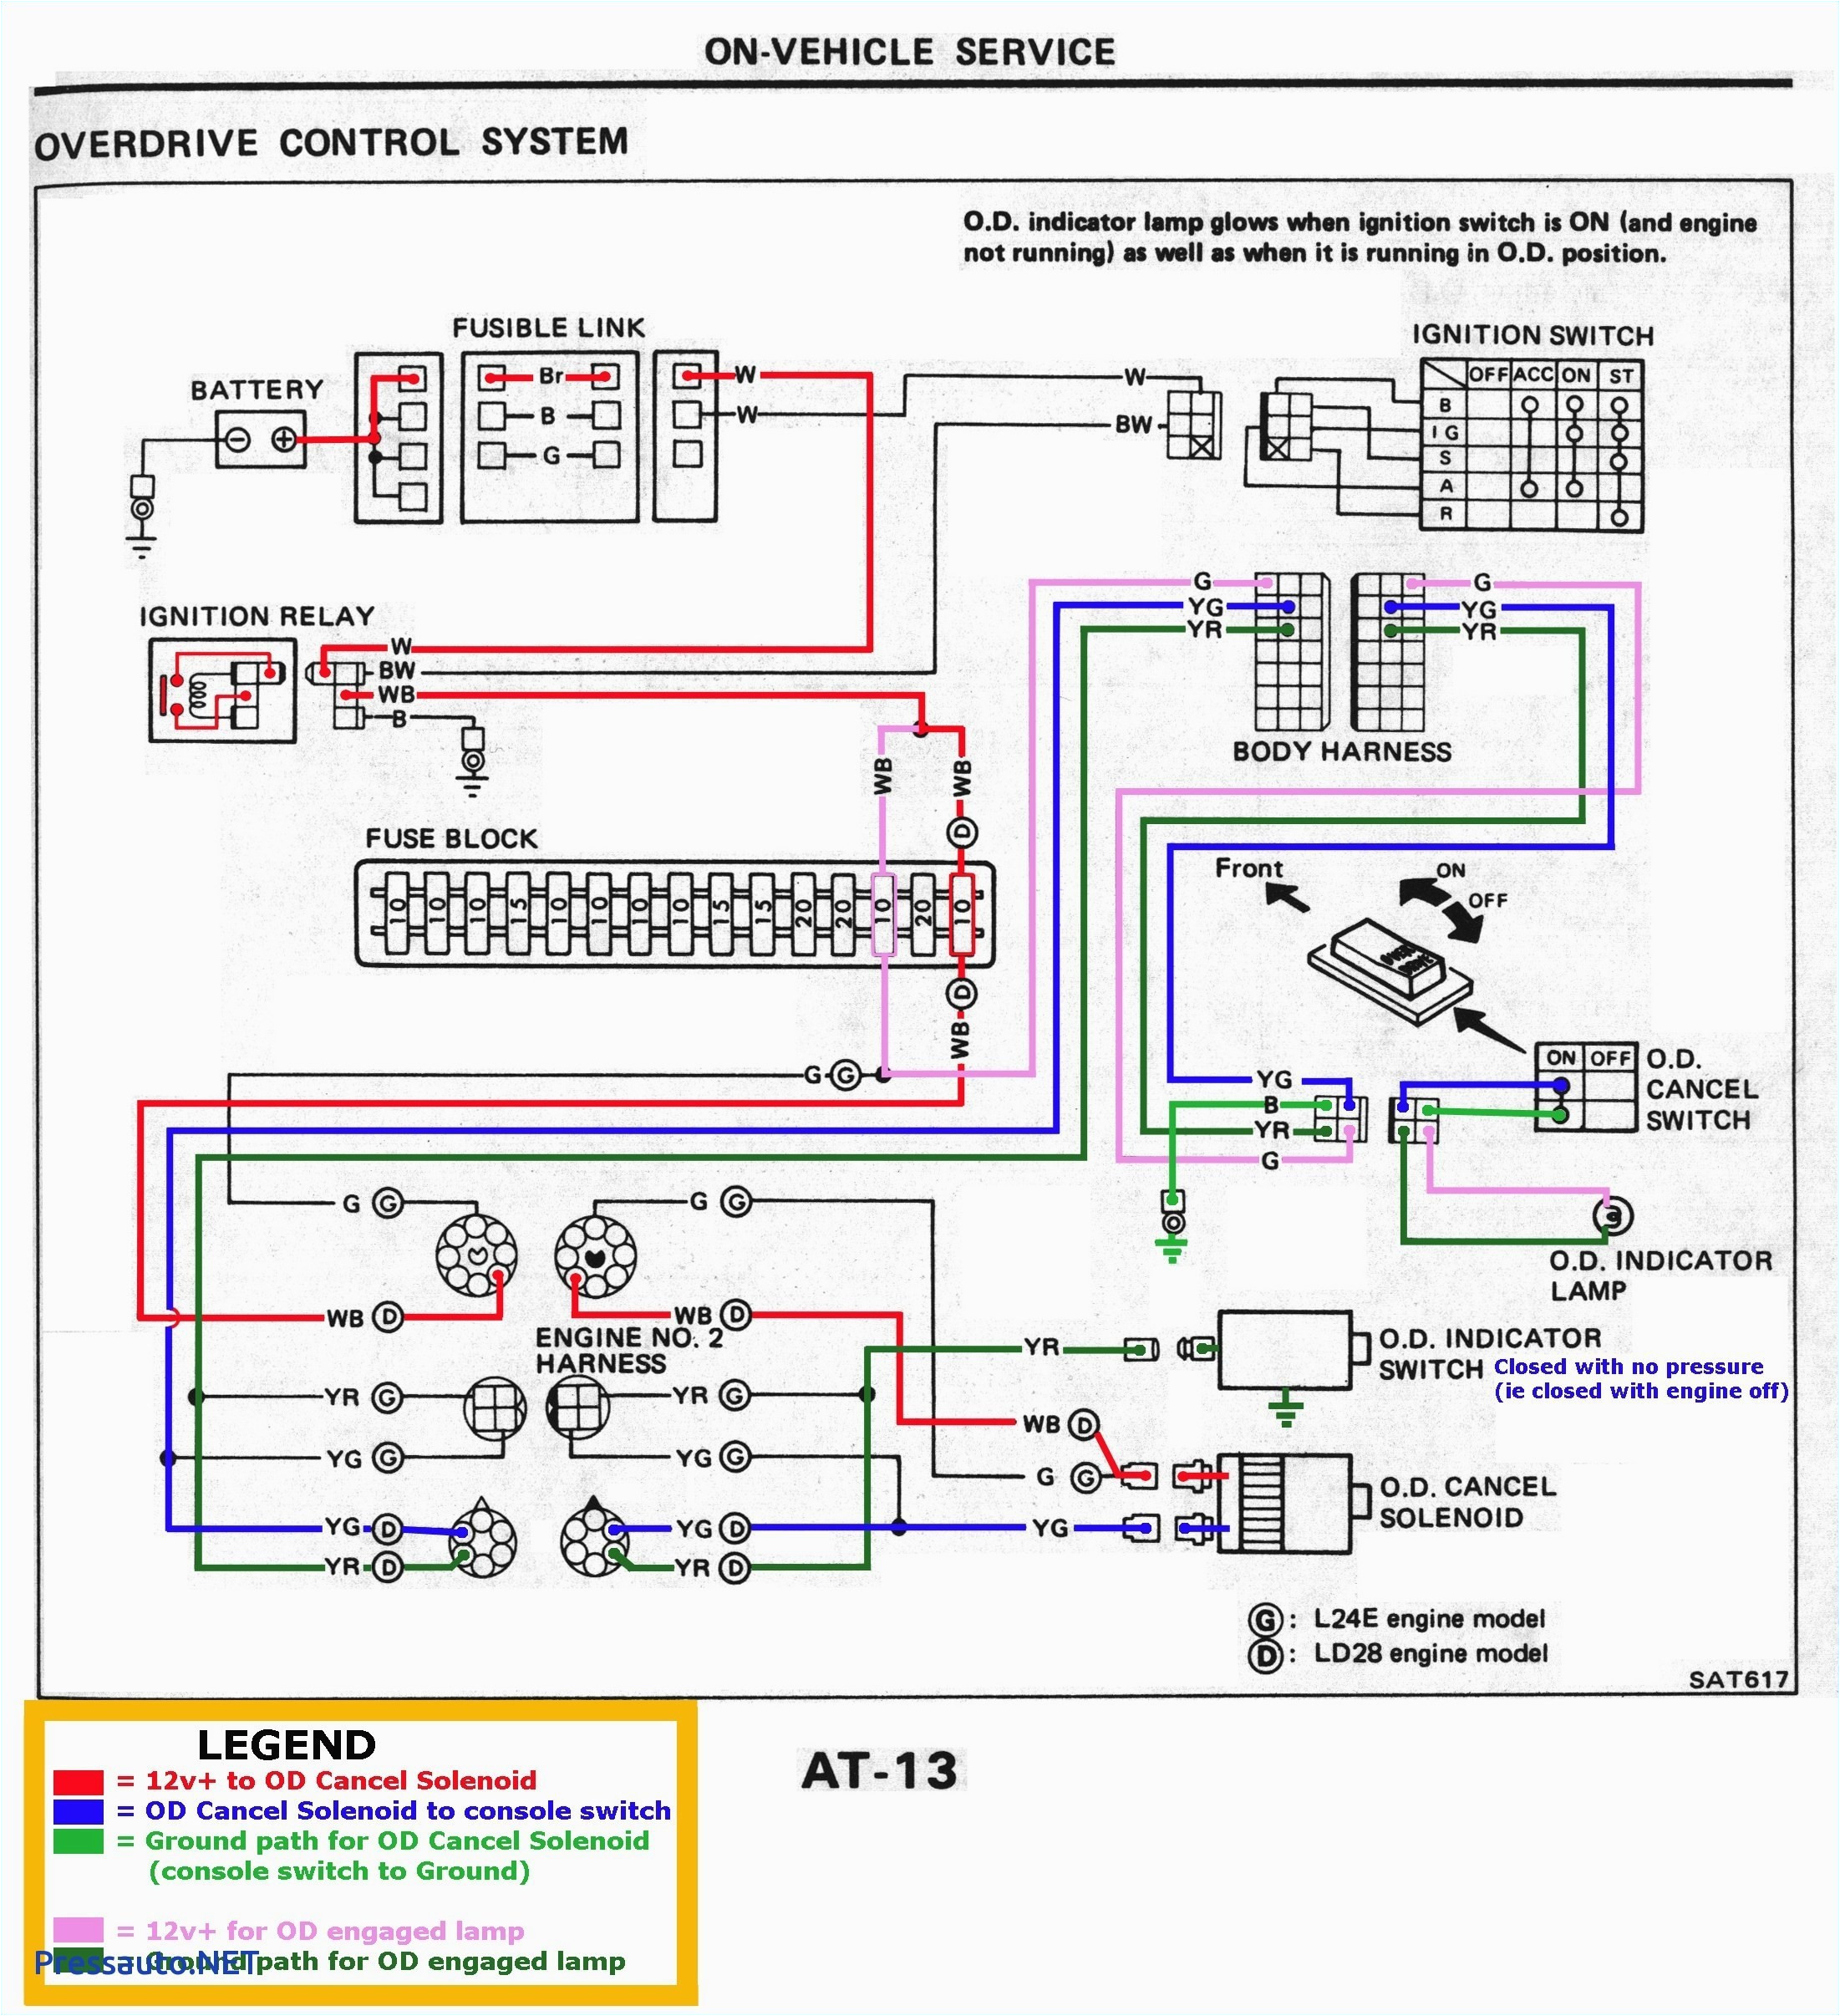 1995 4l60e wiring harness diagram wiring diagrams bib neutral safety switch wiring furthermore 1995 gm pcm pinout diagram